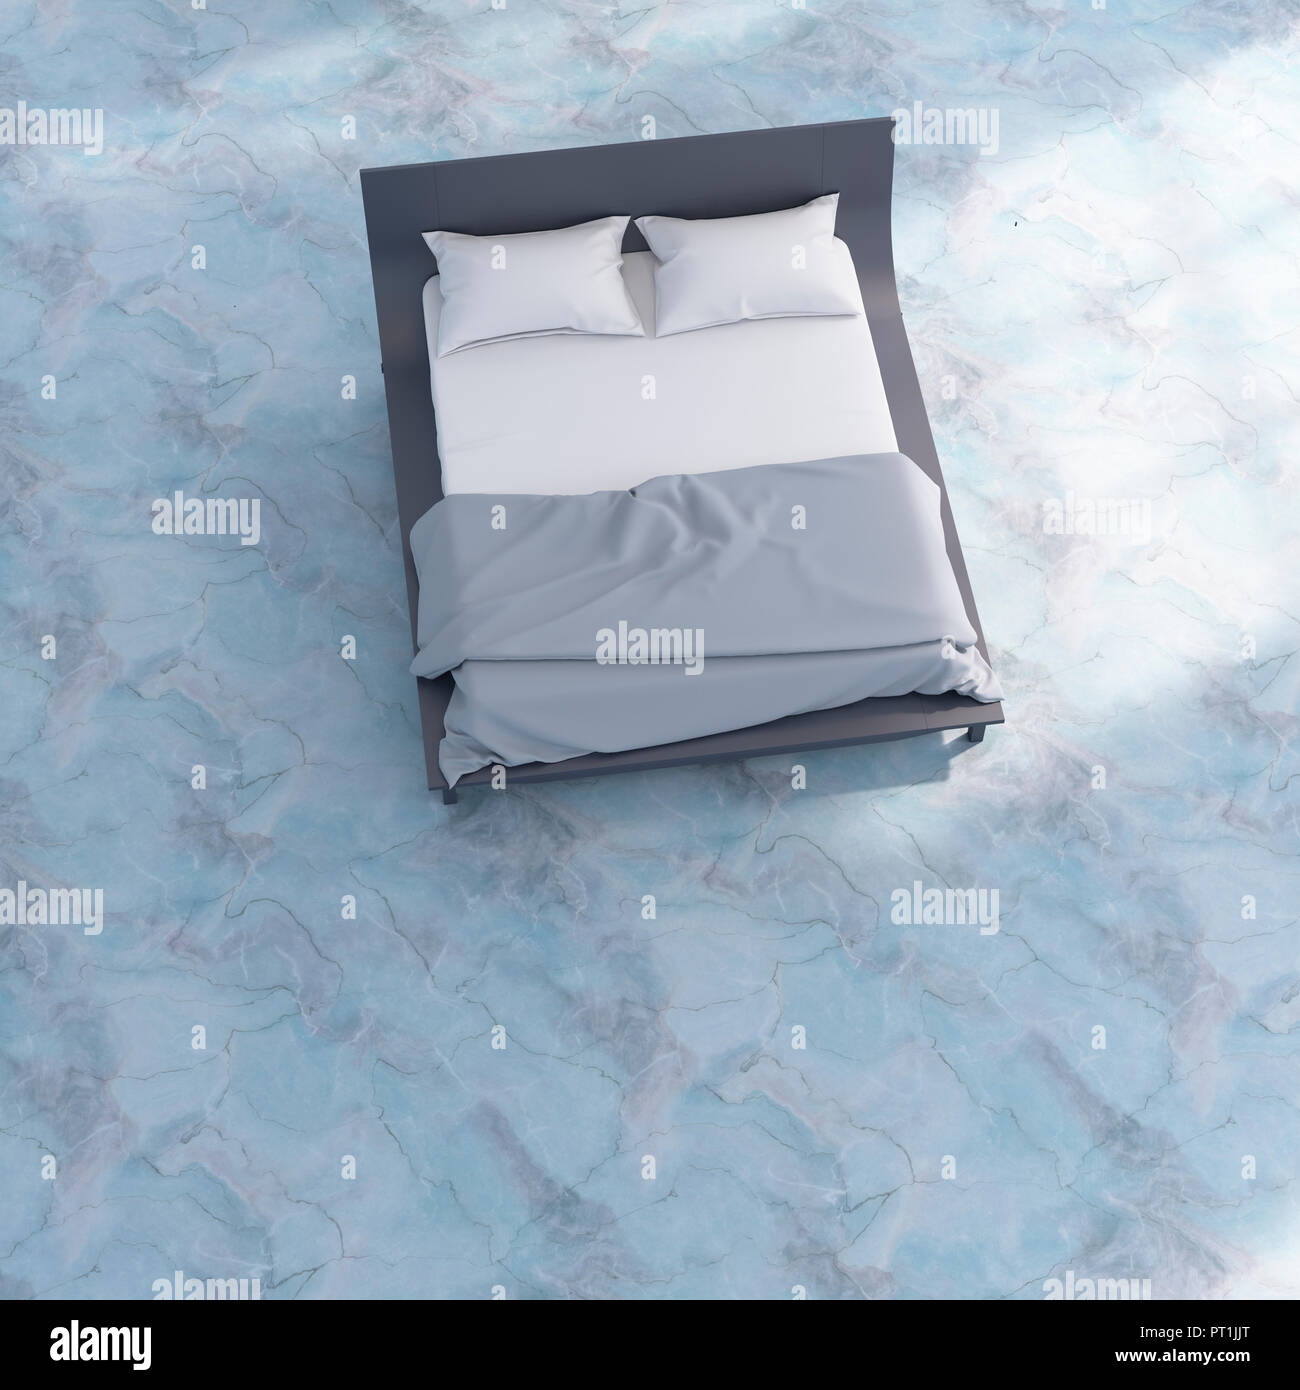 3D rendering, Bed with bedding on blue marble floor Stock Photo